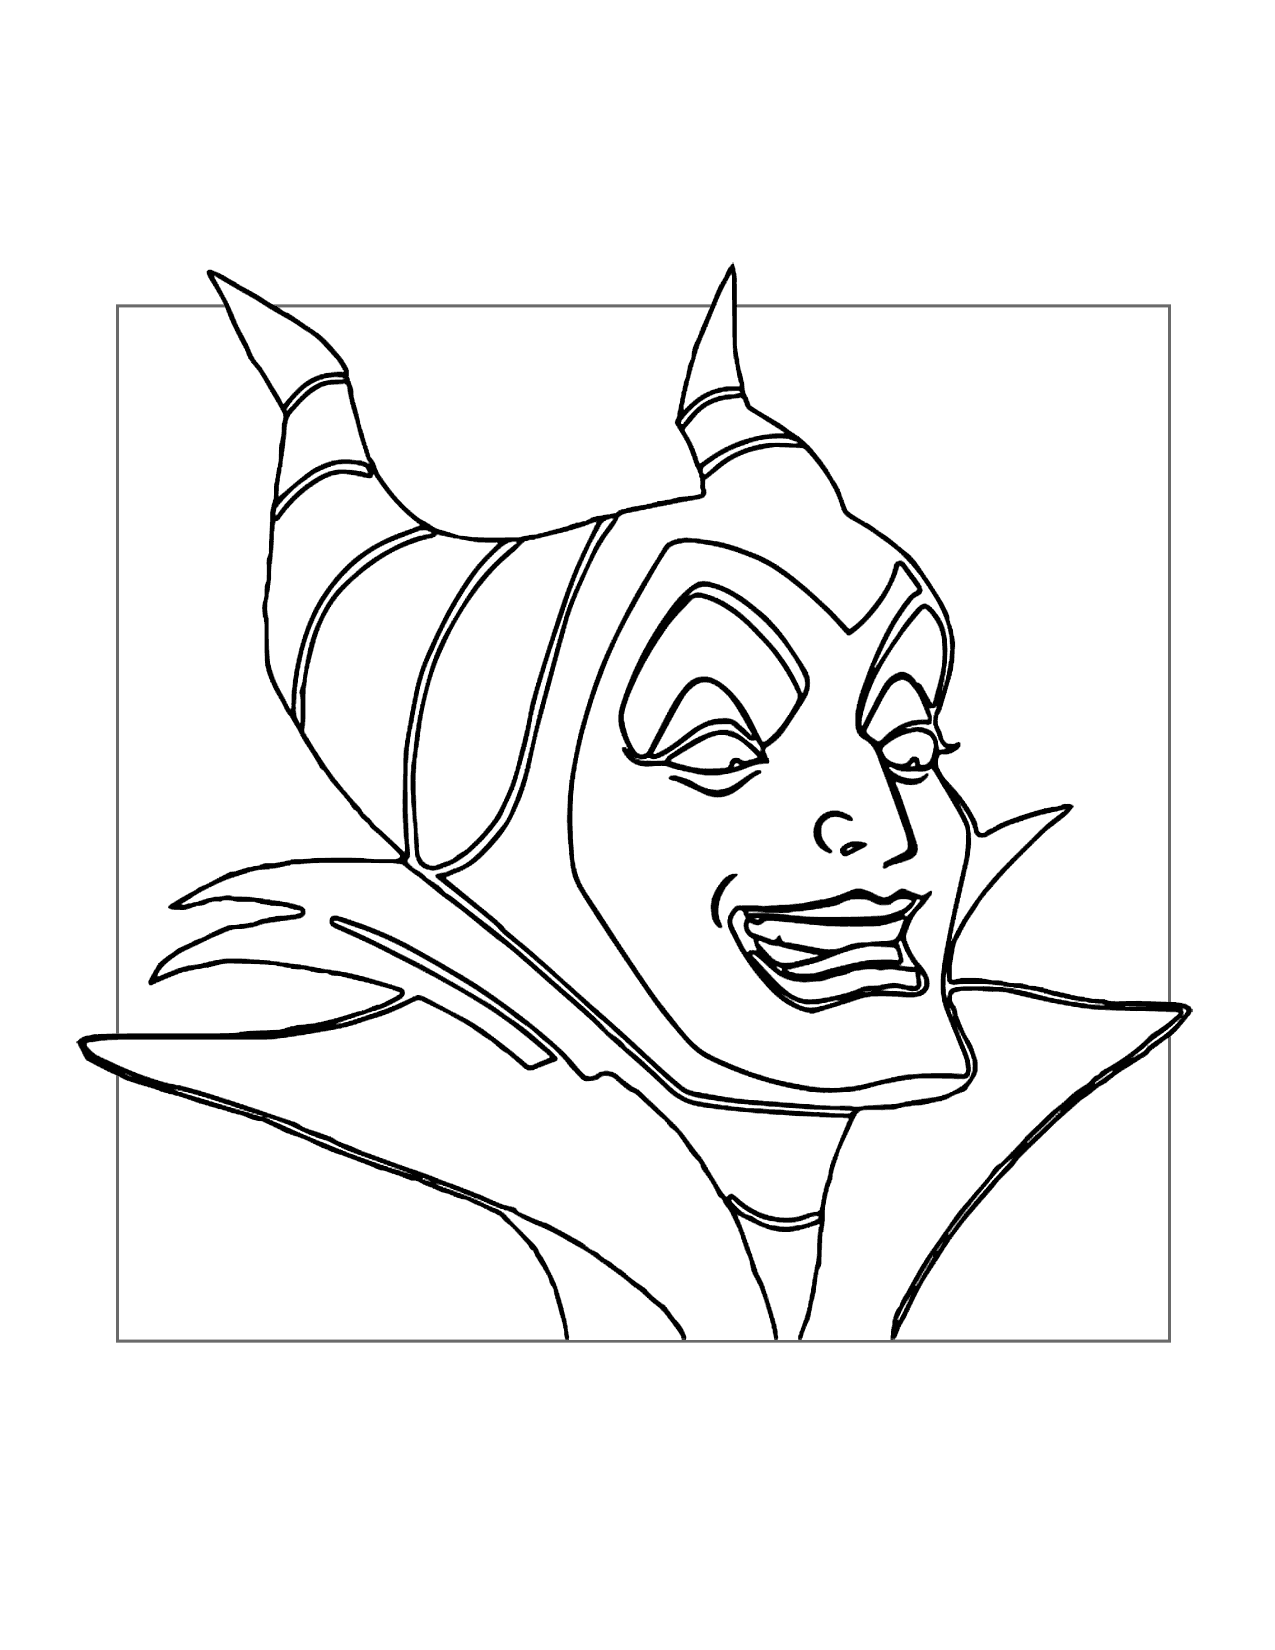 Maleficent Is Scary Coloring Page